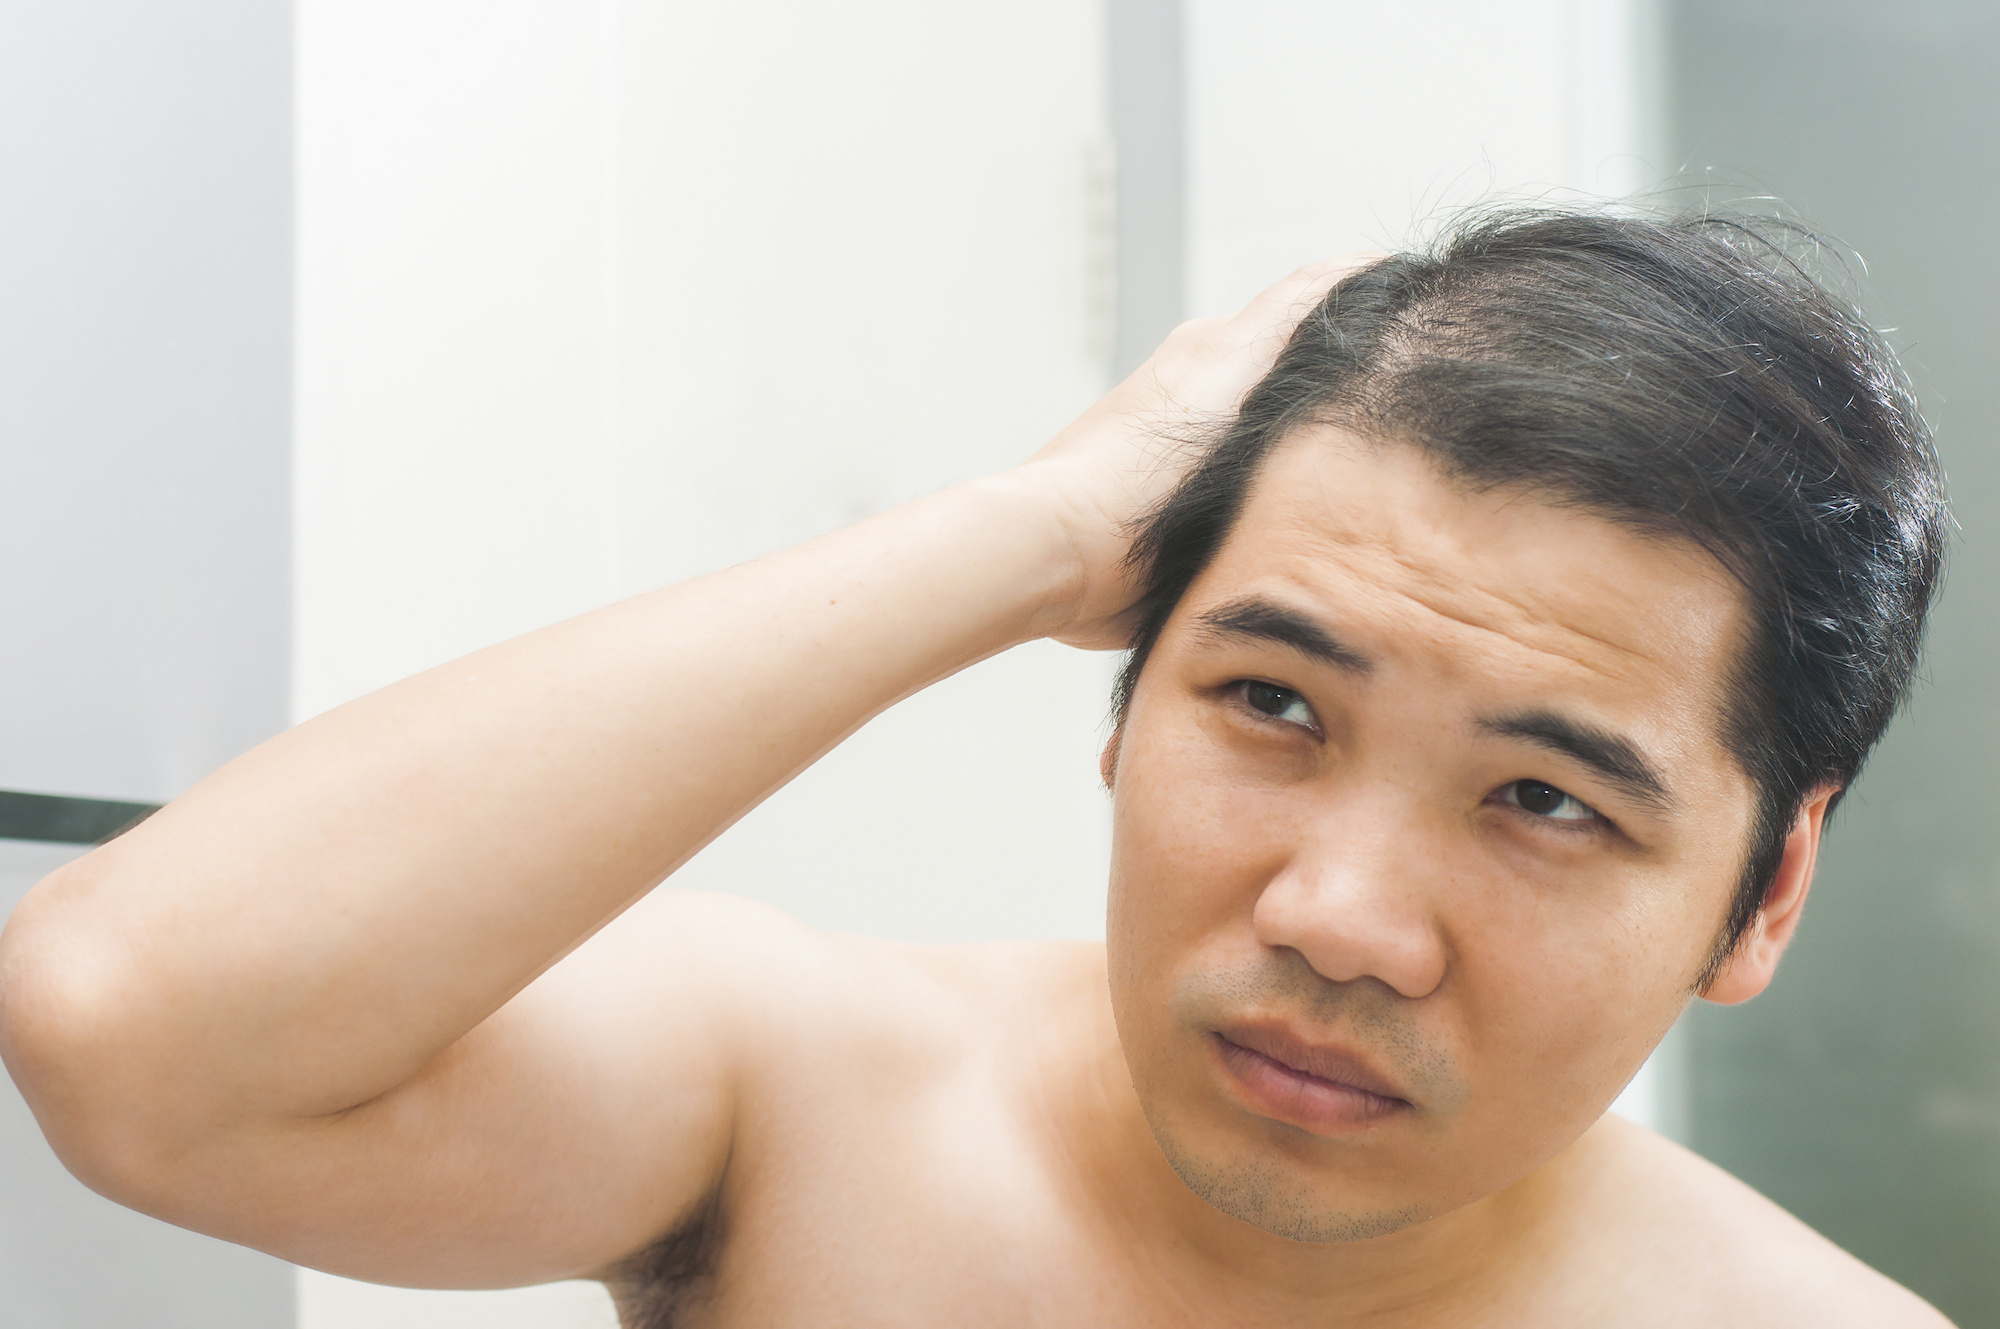 How are Scarring and Non-Scarring Hair Loss Different?